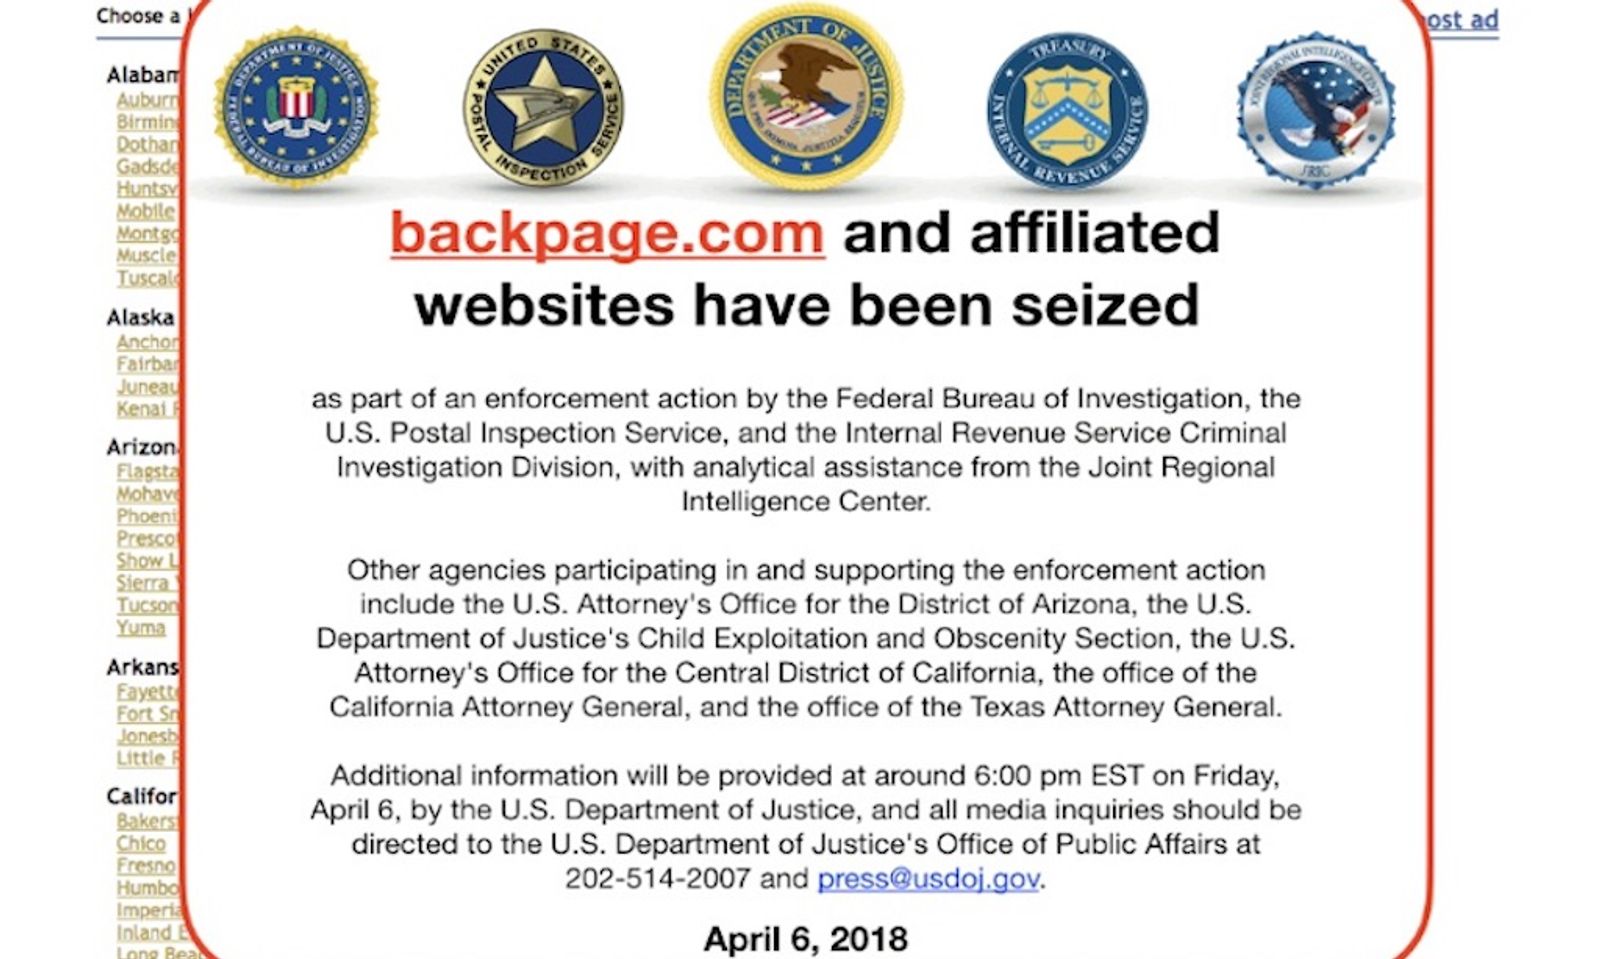 With Backpage Taken Down, Feds Now Targeting 3 Other Sex Ad Sites